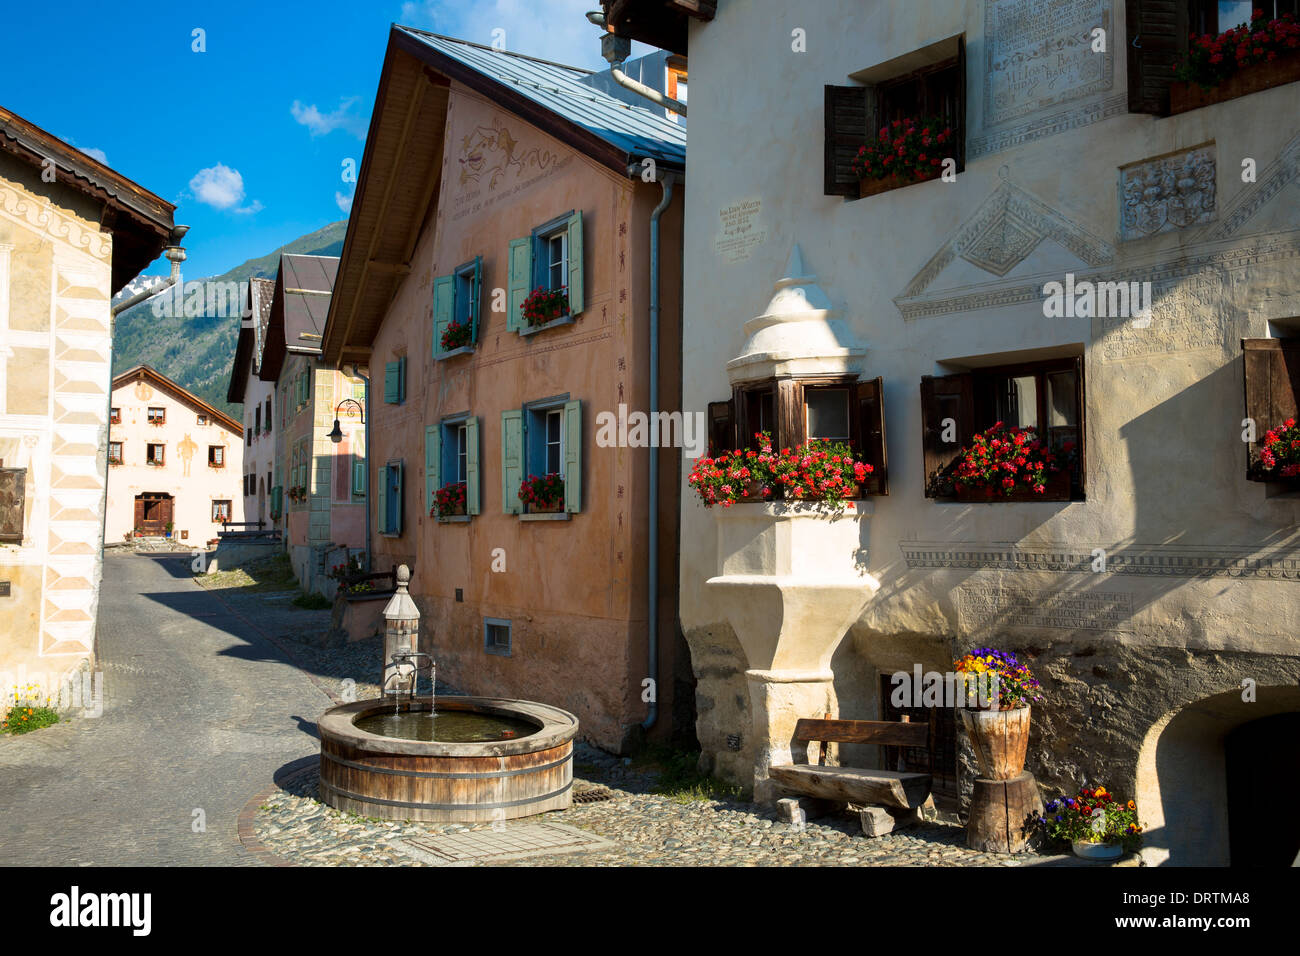 In the Engadine Valley the village of Guarda with old painted stone 17th Century buildings, Switzerland Stock Photo